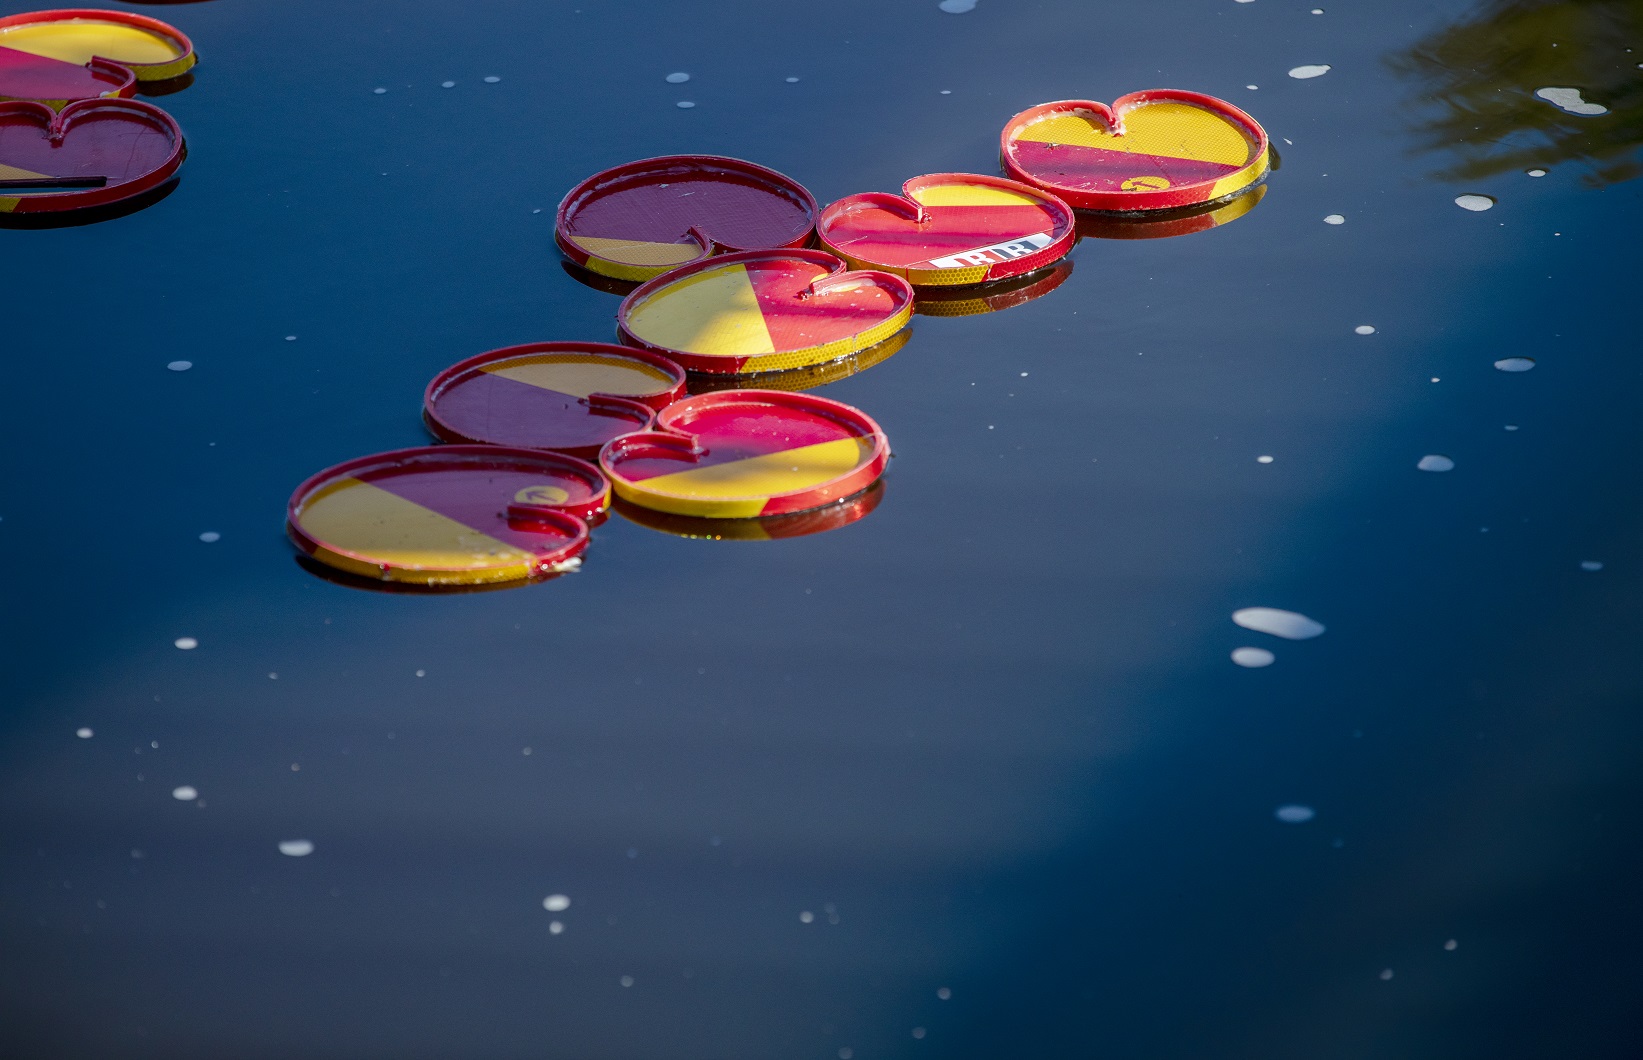 Water lilies made of warning signs lie and float on the water in Svartån.